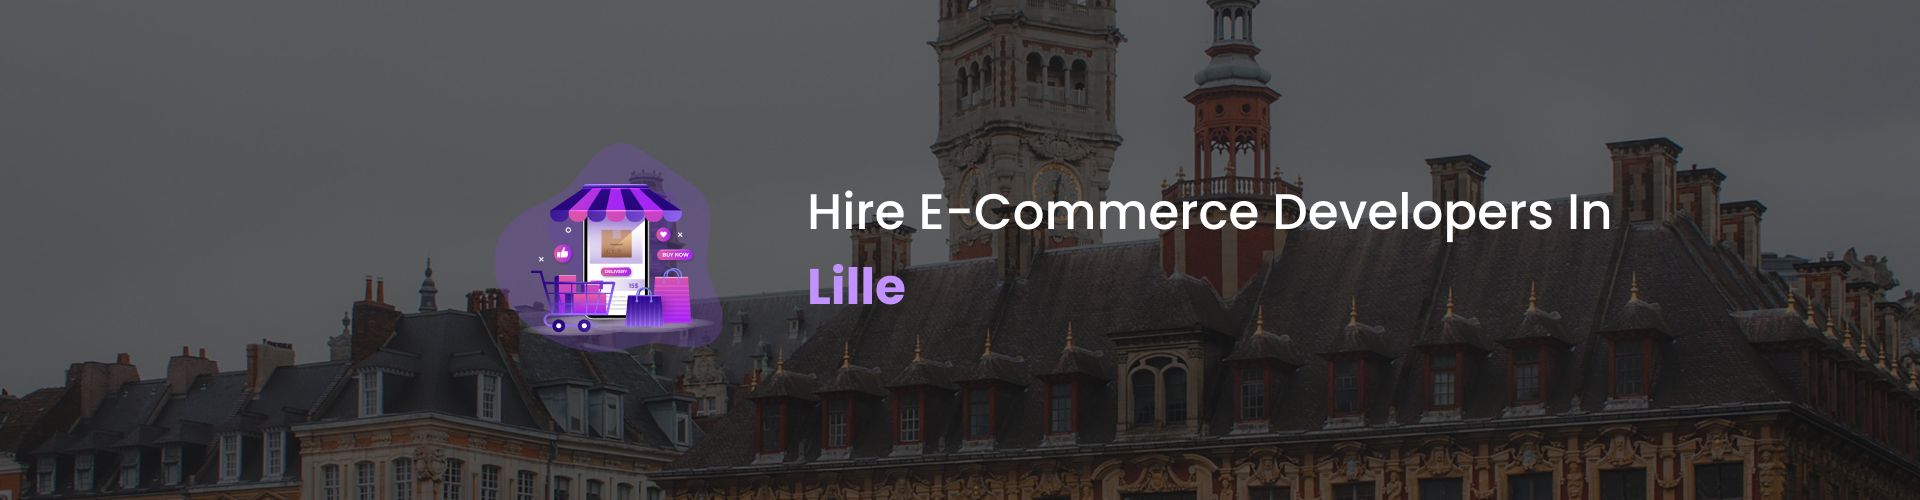 ecommerce developers lille